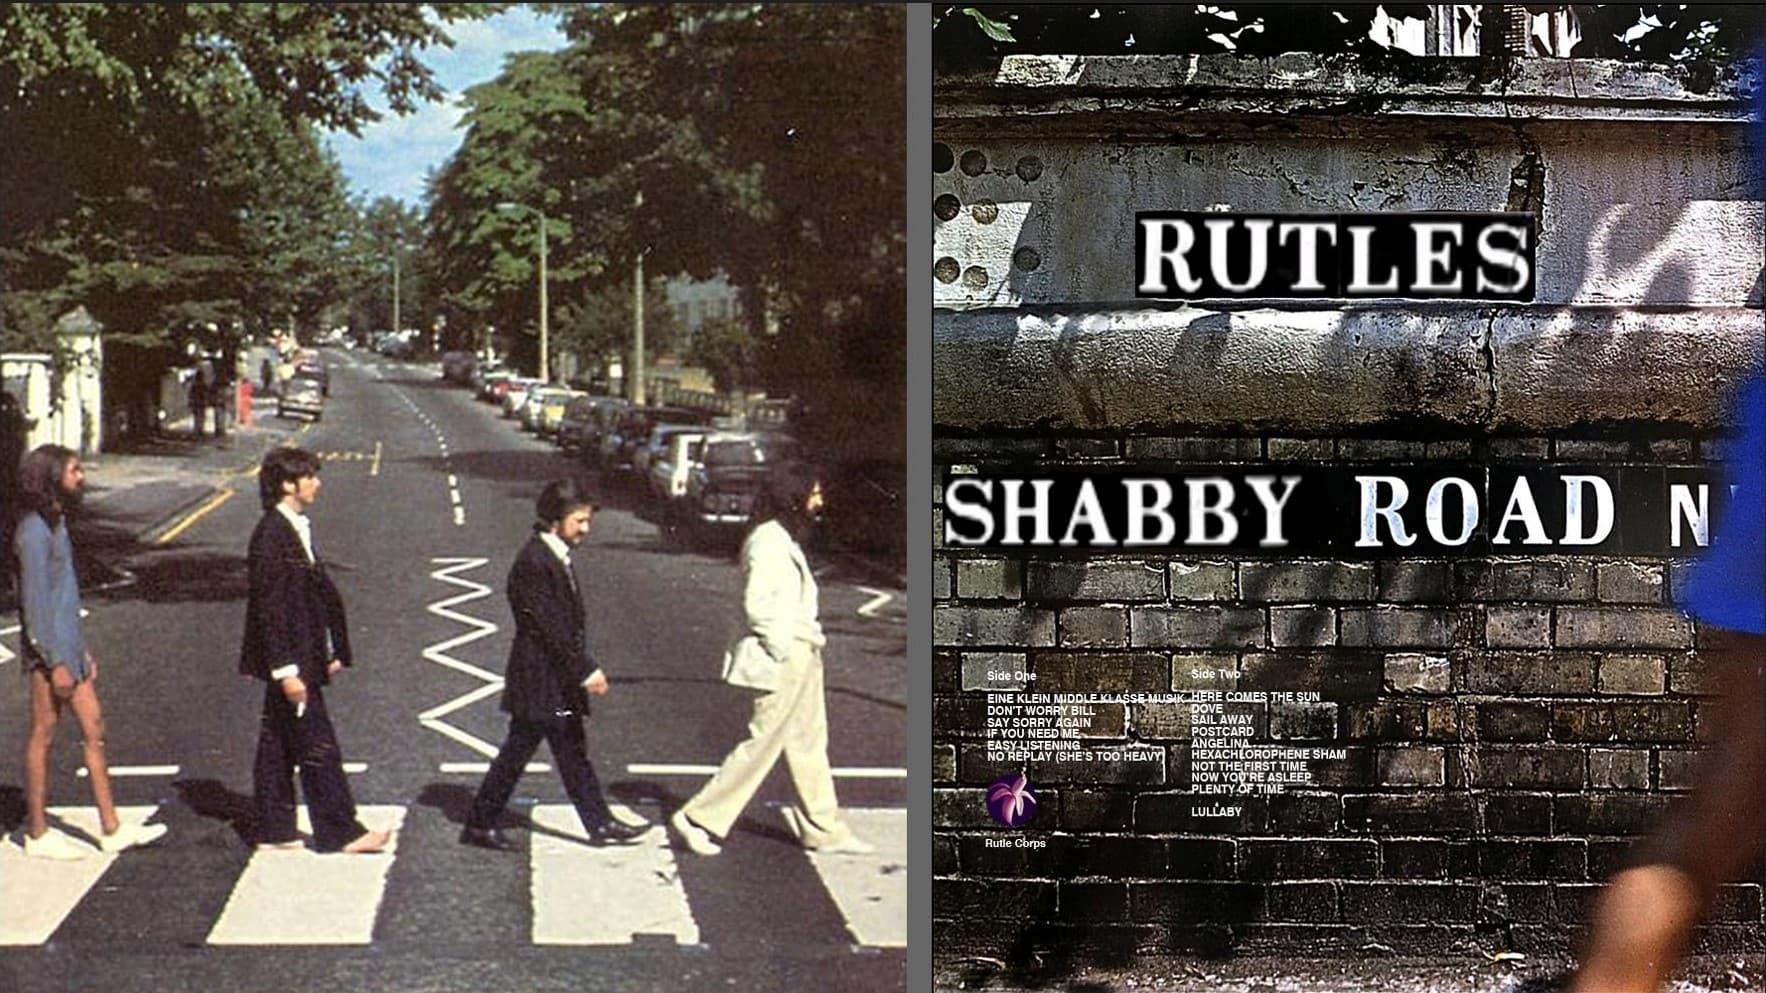 Inside Shabby Road: The Music of 'The Rutles' backdrop